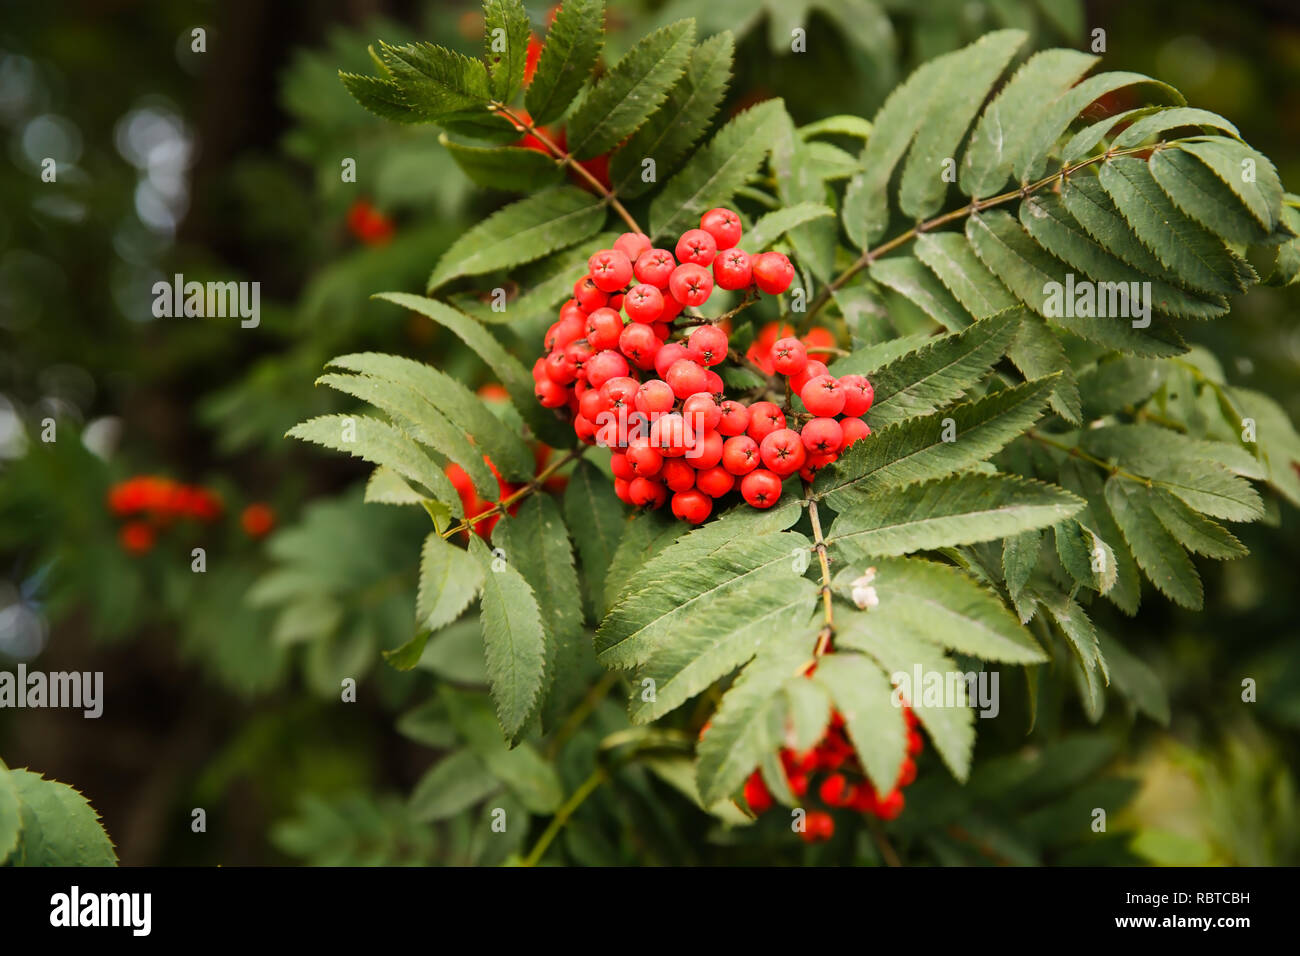 Rouge mûre rowan berry tree branch close up photo. Banque D'Images